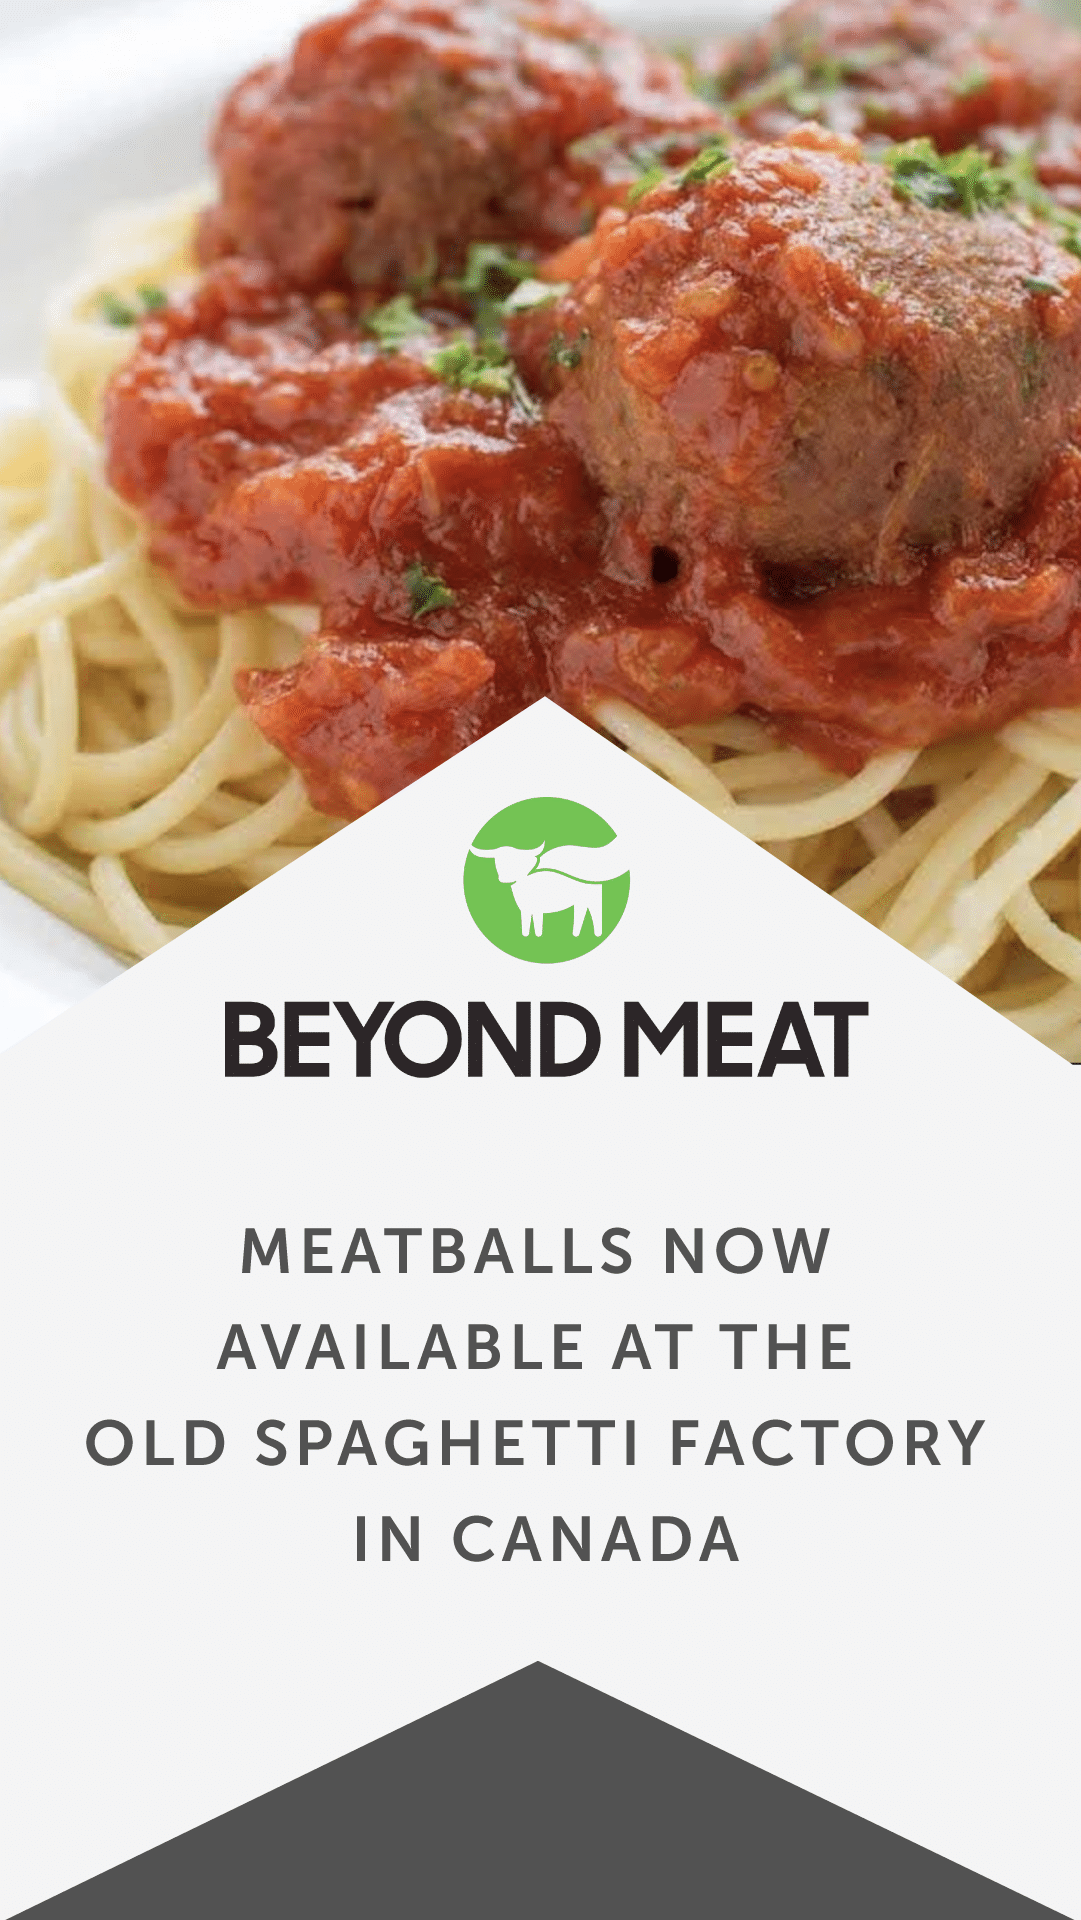 Beyond Meatballs Now Available at The Old Spaghetti Factory in Canada